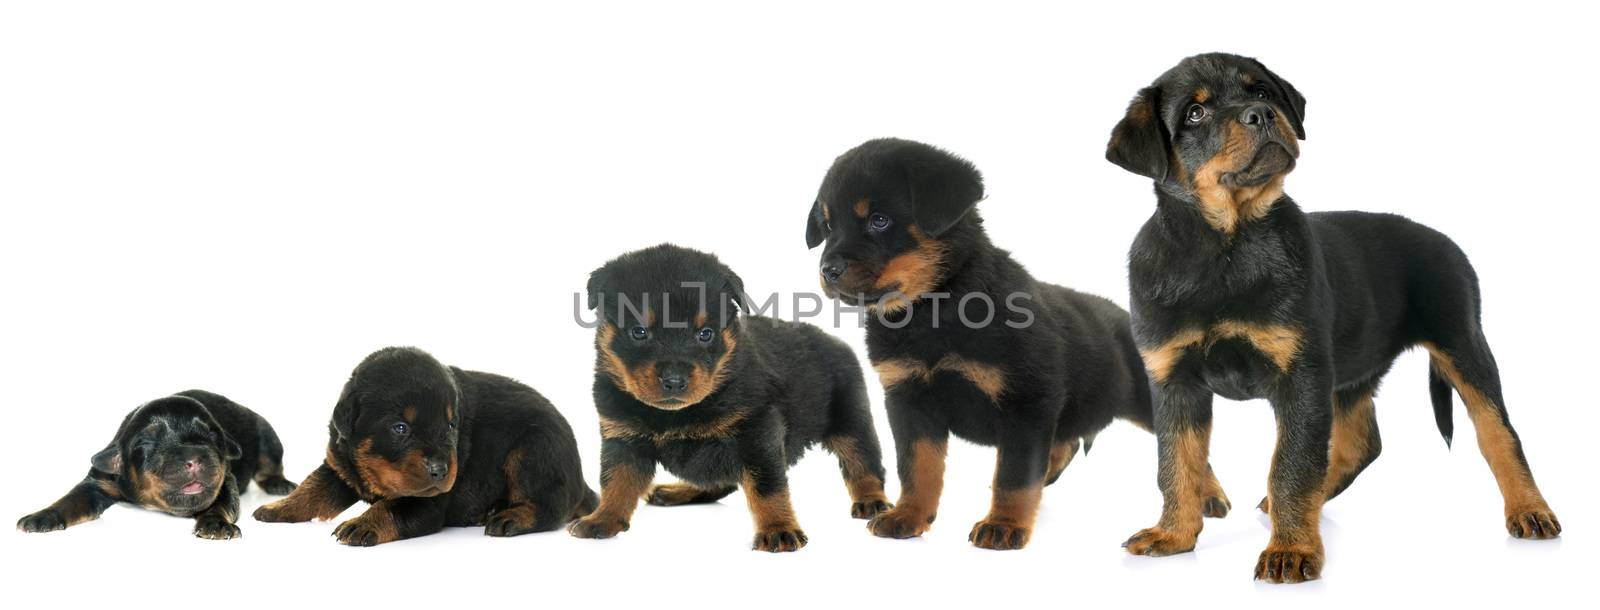 growth of puppy rottweiler in front of white background